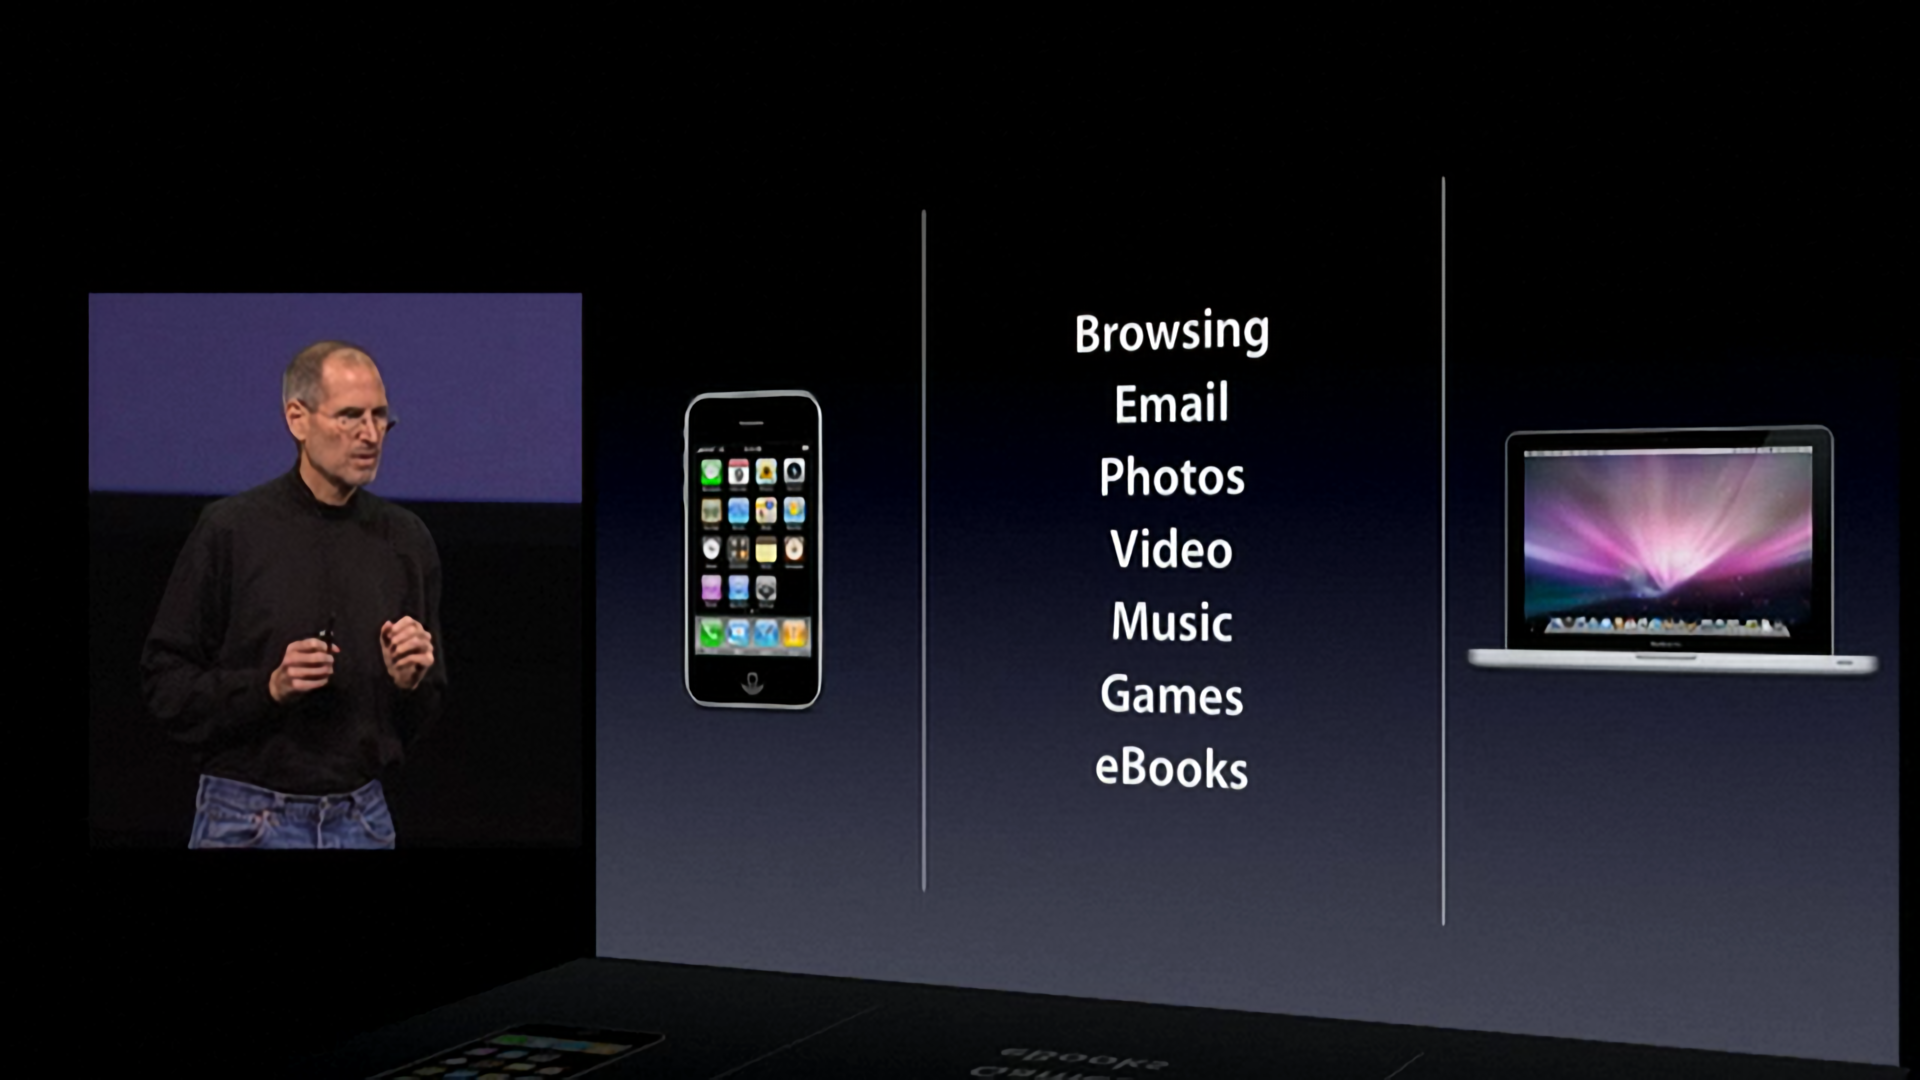 Jobs explained that a third category of device had to be 'far better at some key things.'